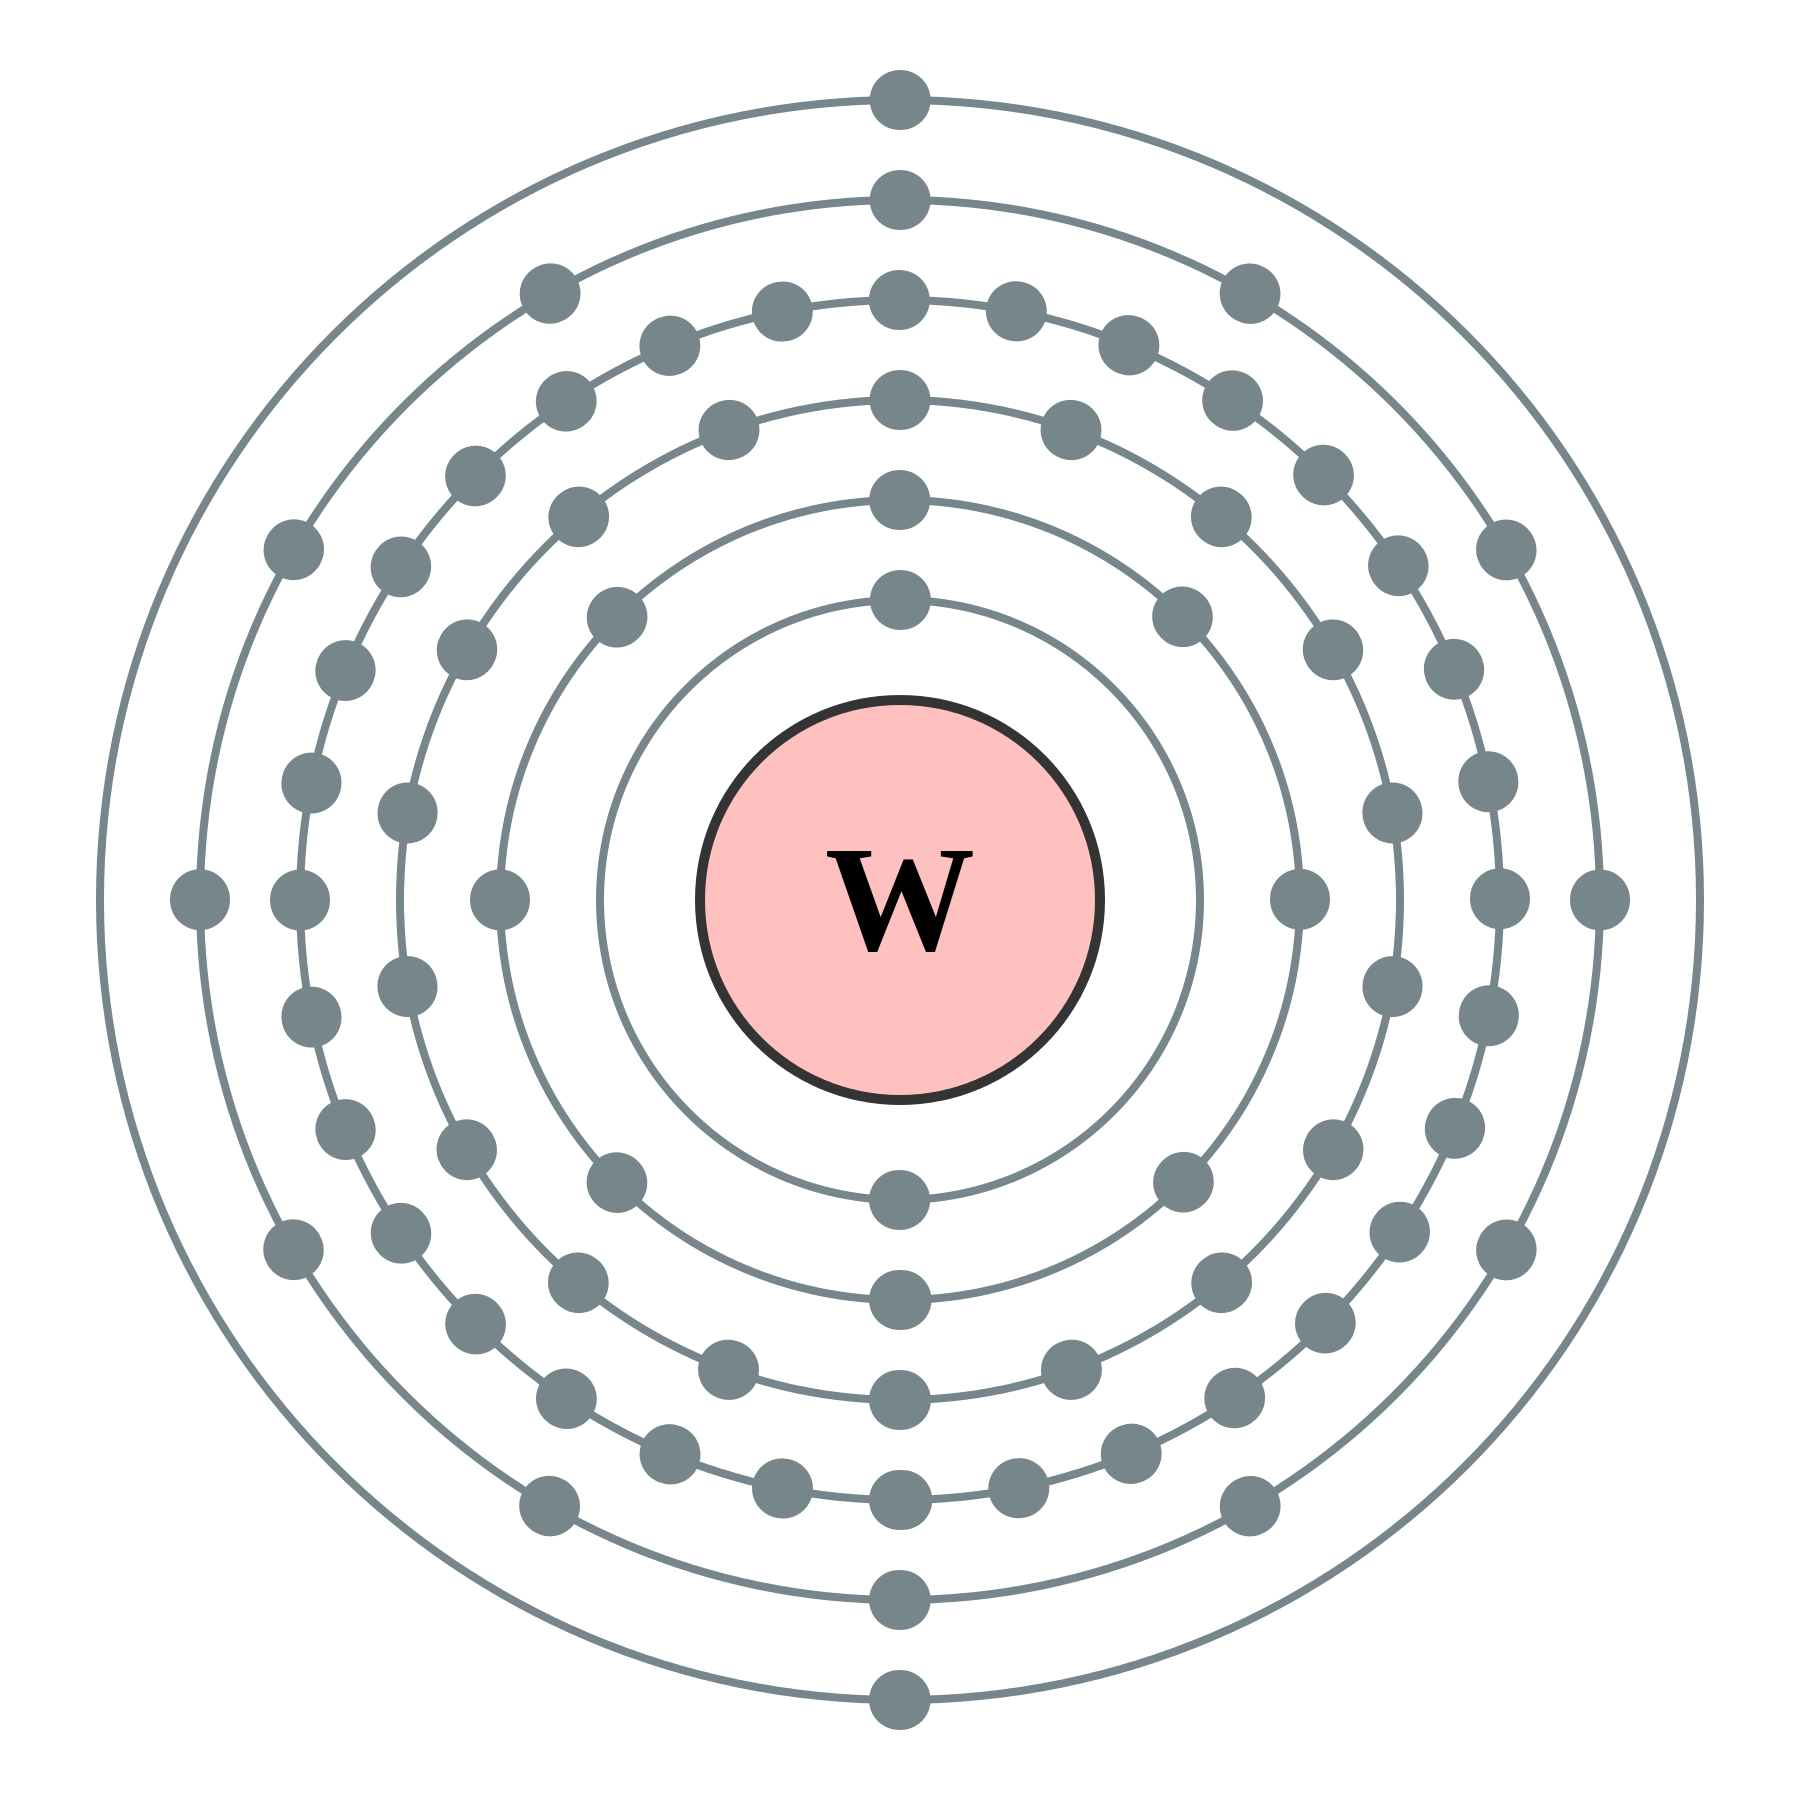 Electron shell 074 Tungsten - no label.svg